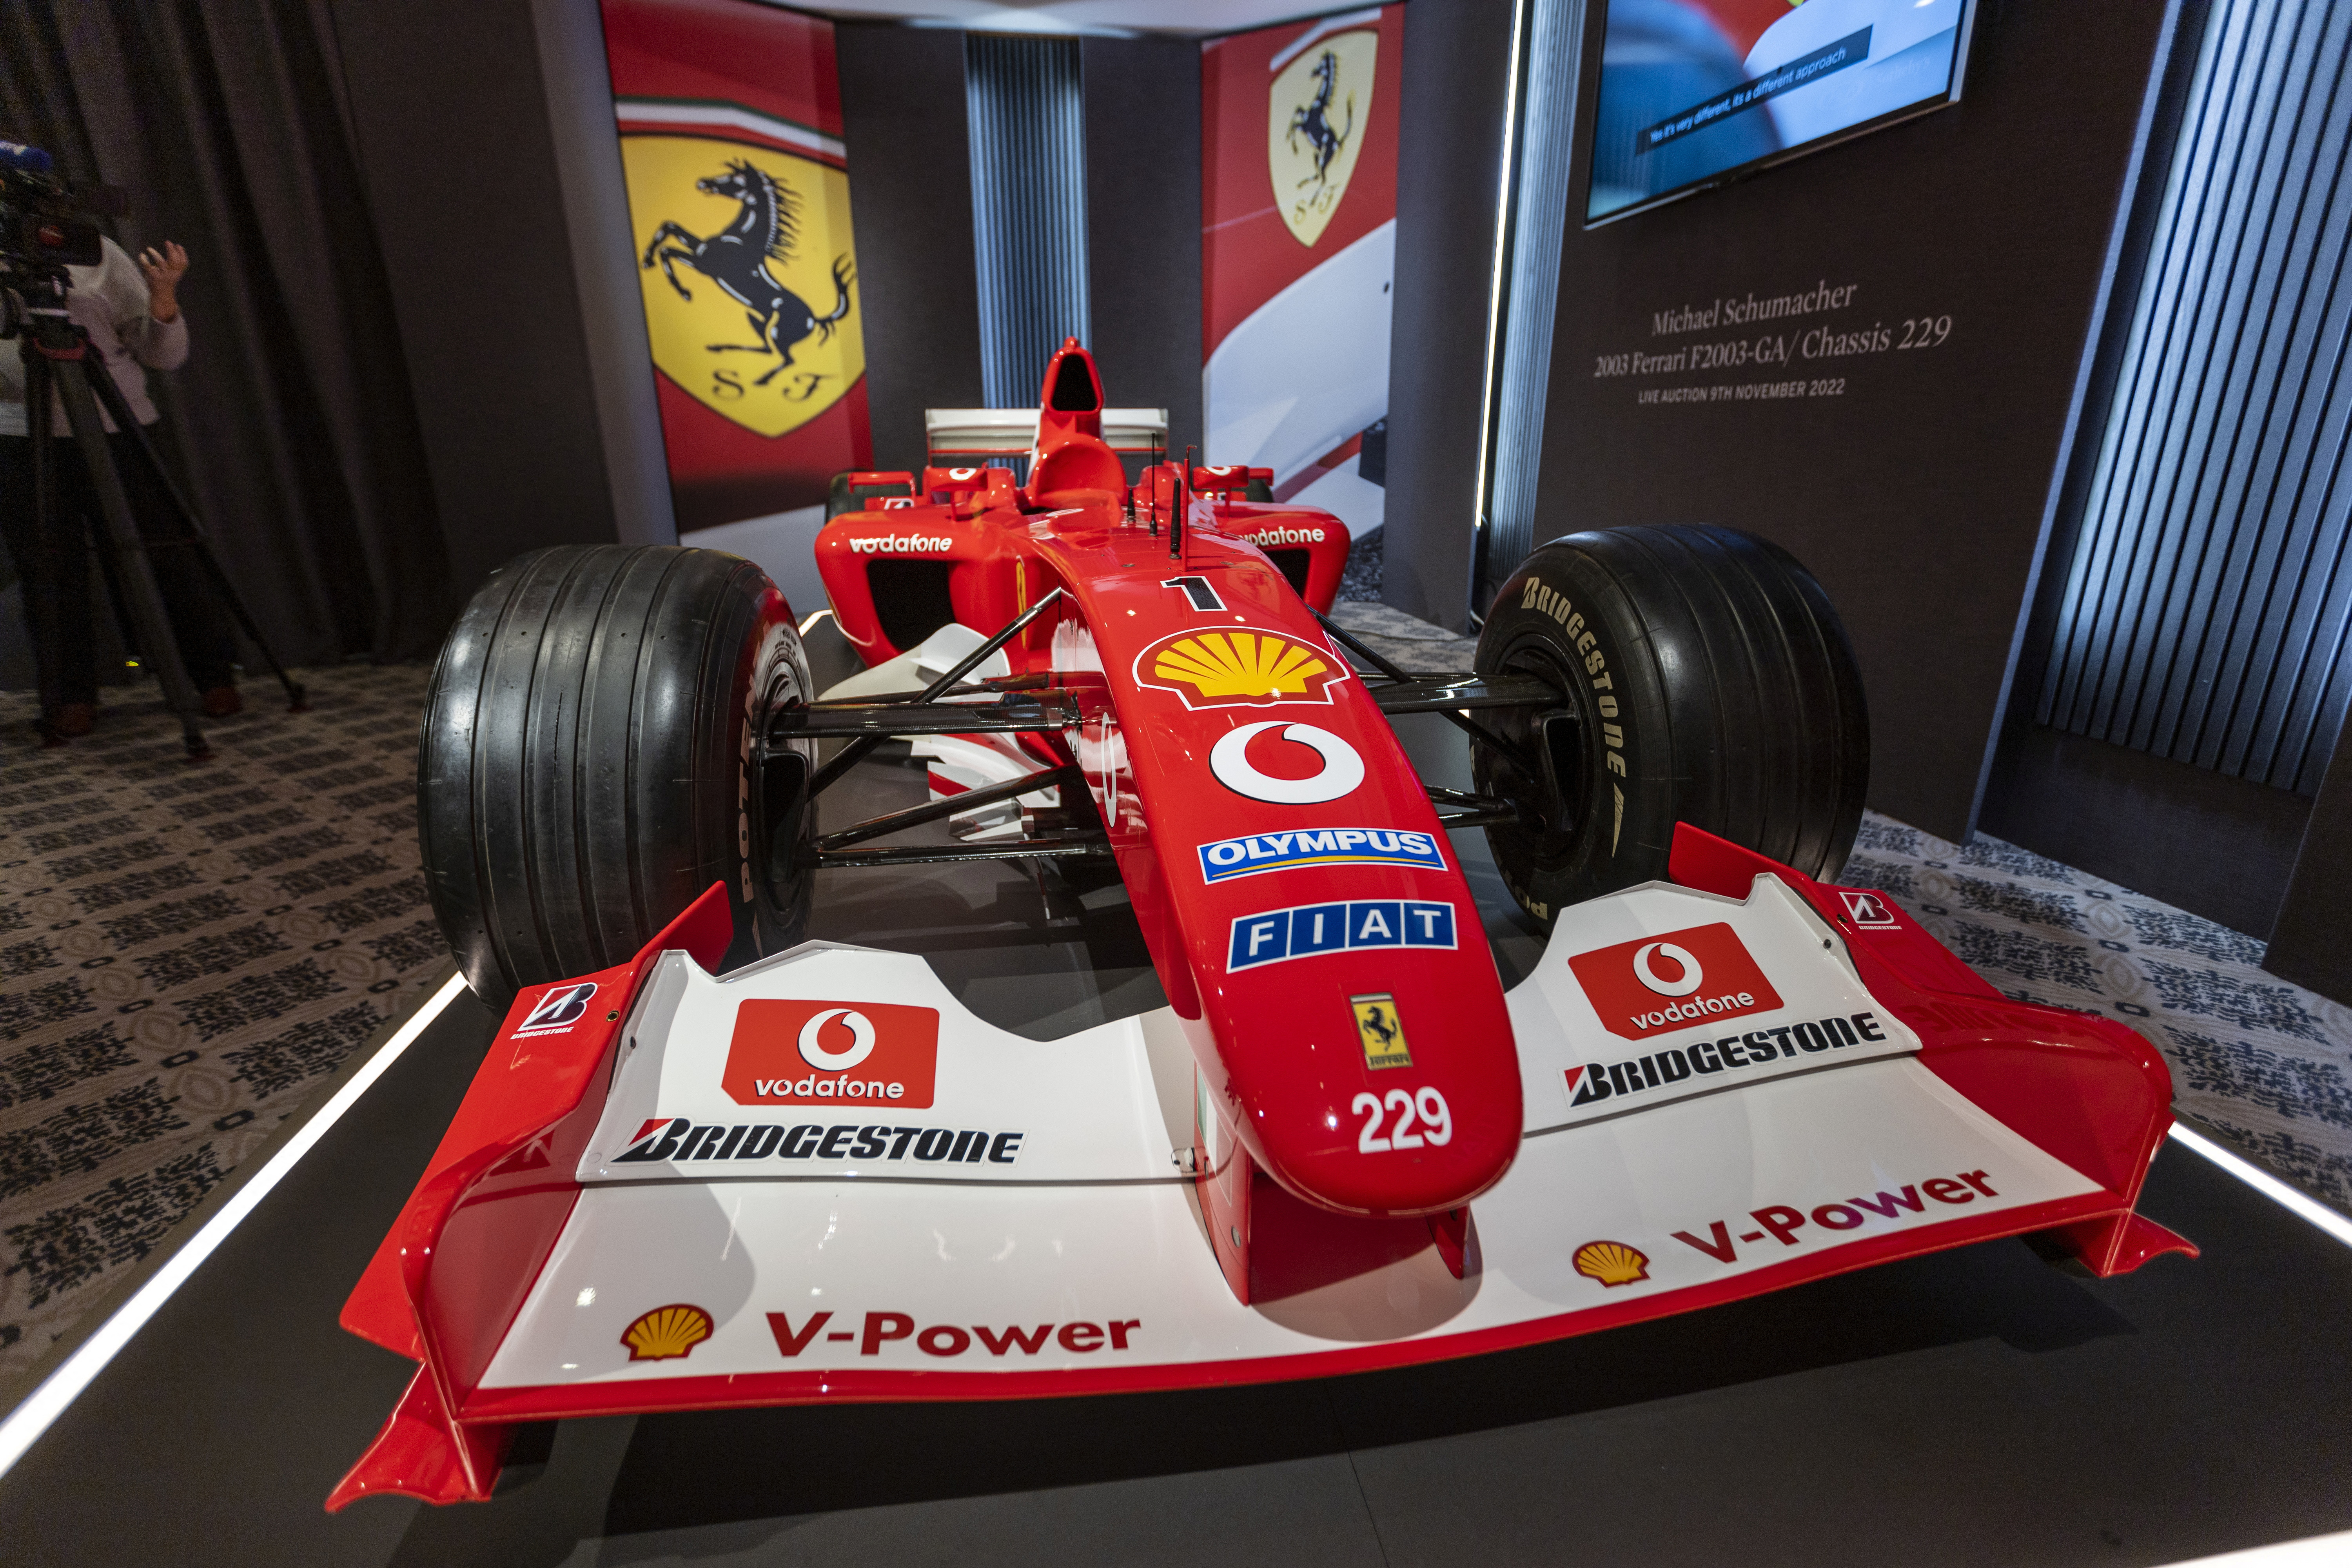 F1: One of Michael Schumacher's Ferraris has sold for almost $15